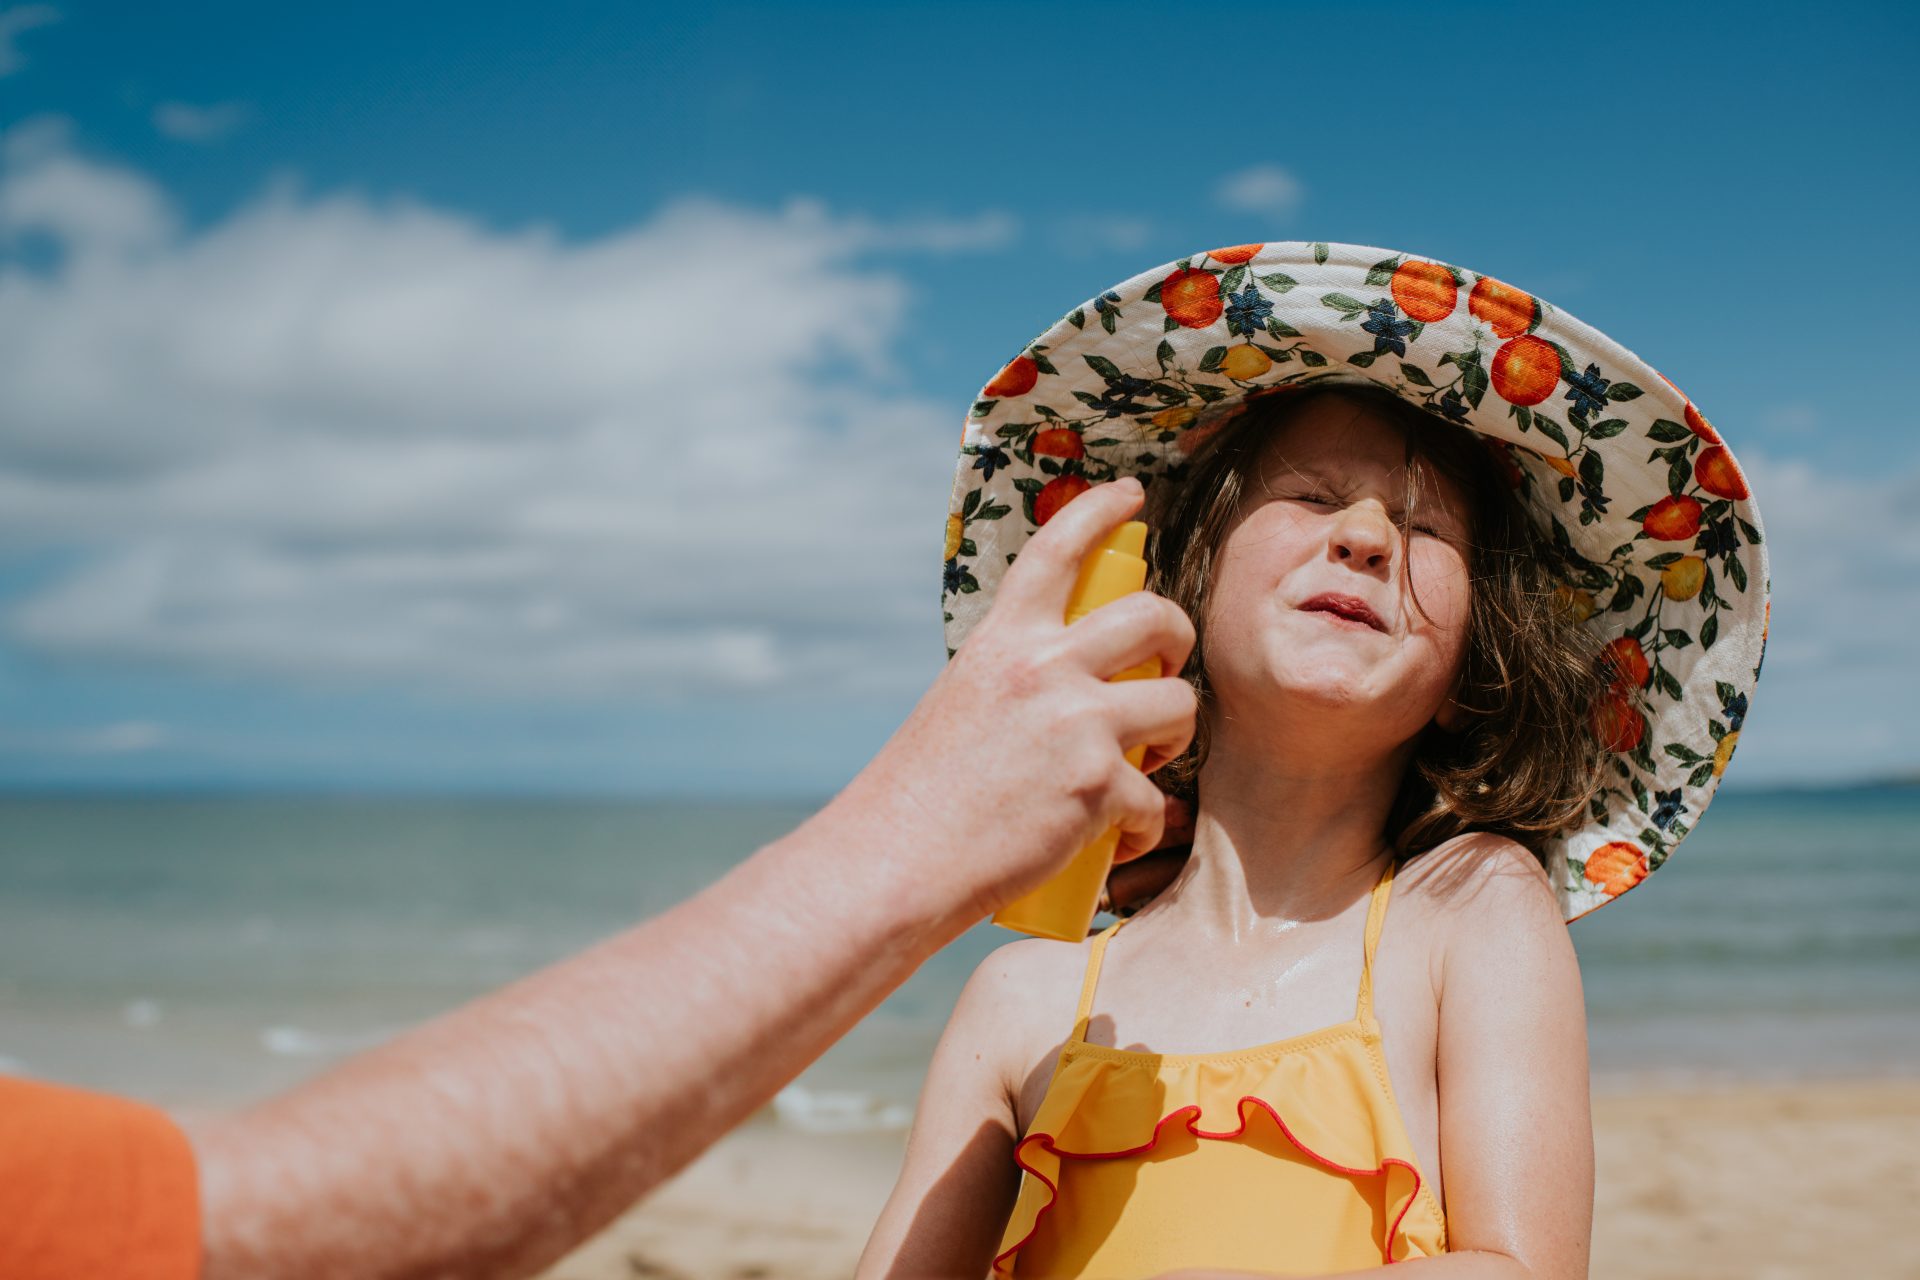 Shedding light on some common sunscreen ingredients